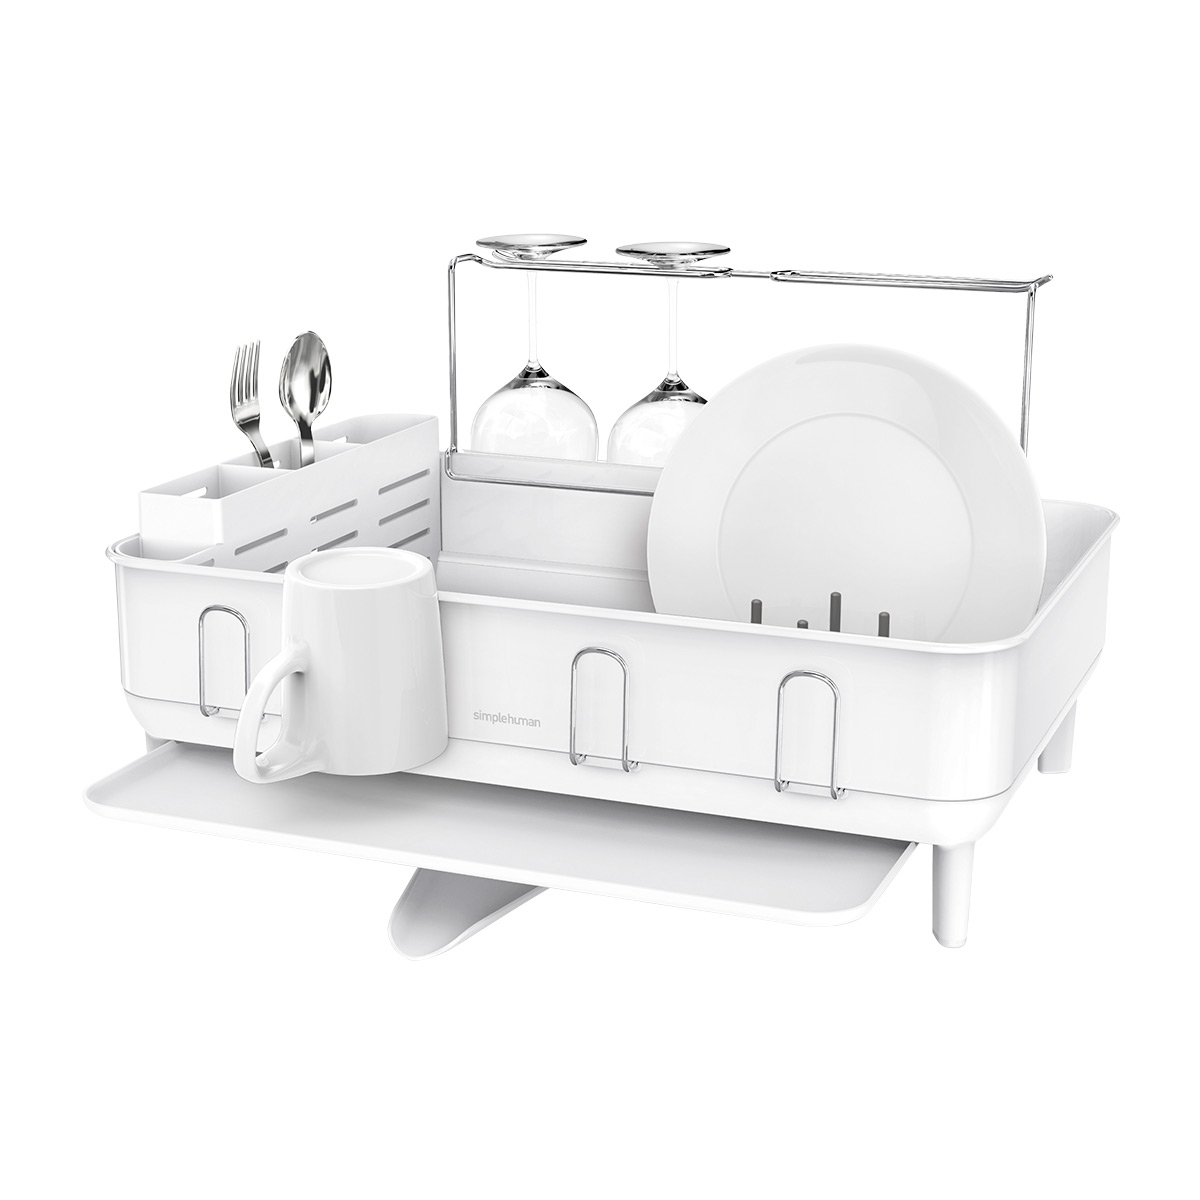 https://www.containerstore.com/catalogimages/479301/10093177-sh-large-steel-frame-dishra.jpg